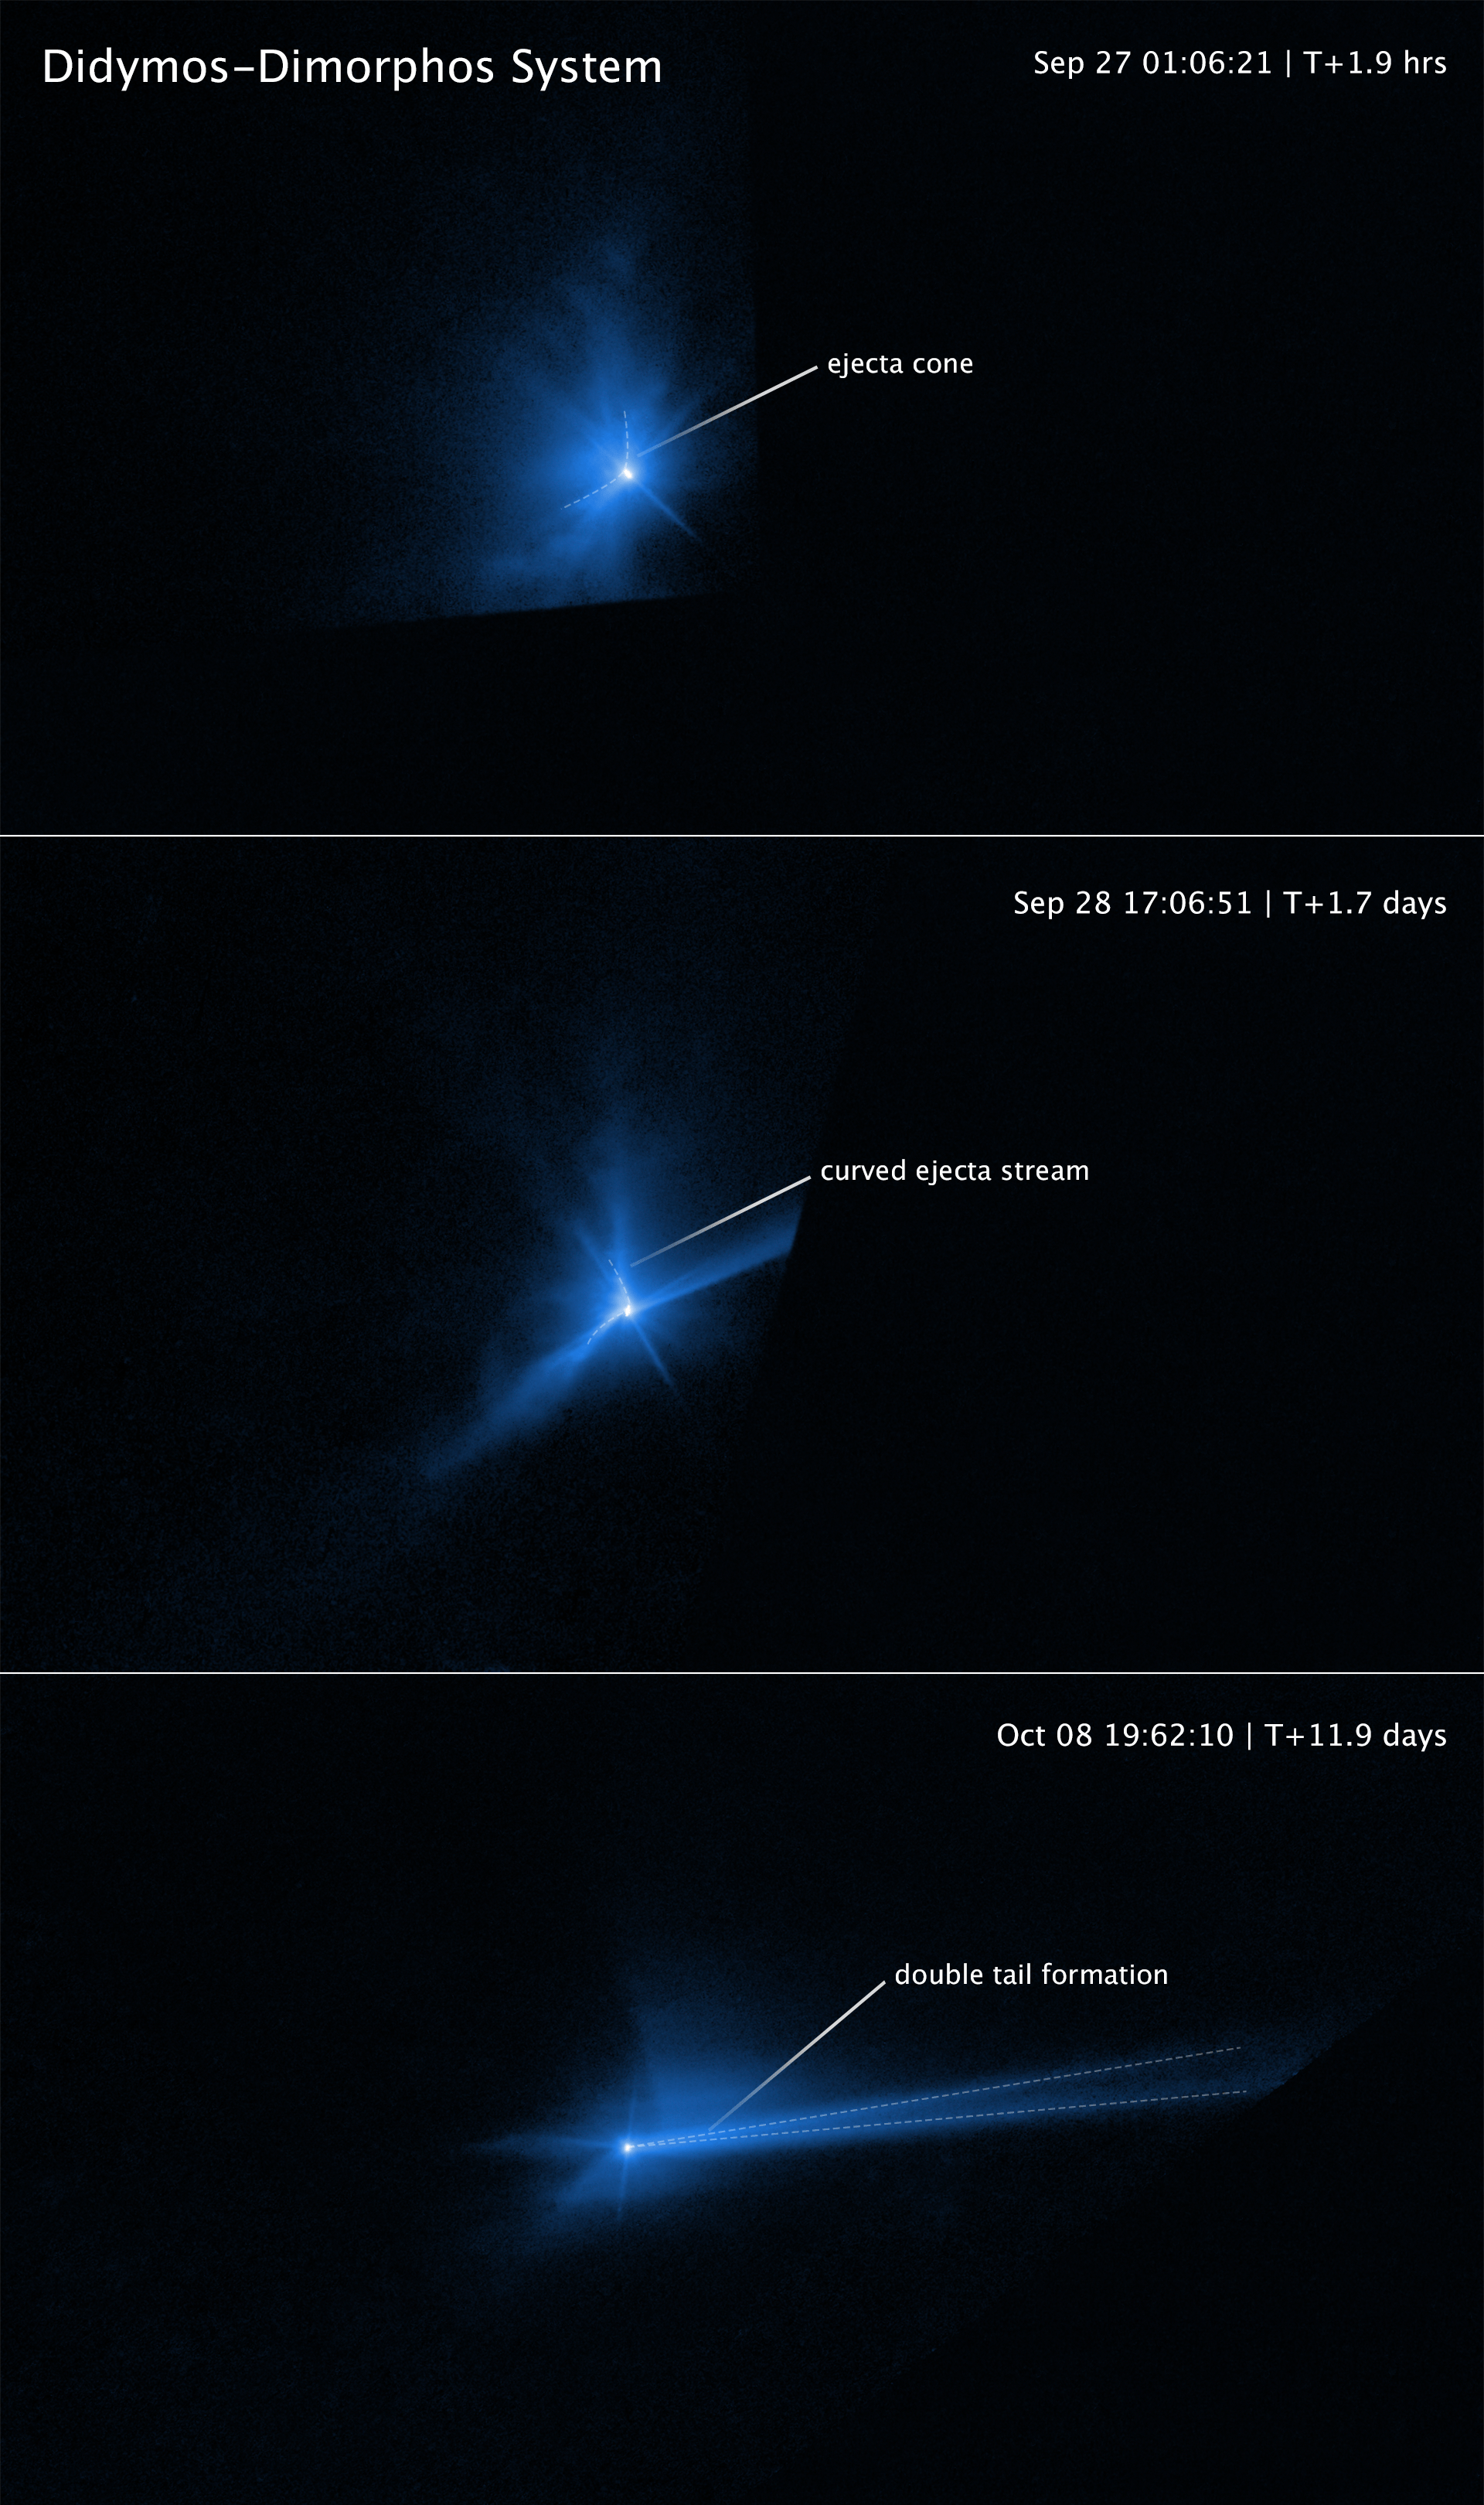 Top (+1.9 hours): bright-white core surrounded by blue cloud. Ejecta Cone rising vertically. Middle (+1.7 days): Blue cloud extended at 2 and 7 o'clock. Ejecta cone curving to the right. Bottom (+11.9 days): double tail formed to the right of bright core.